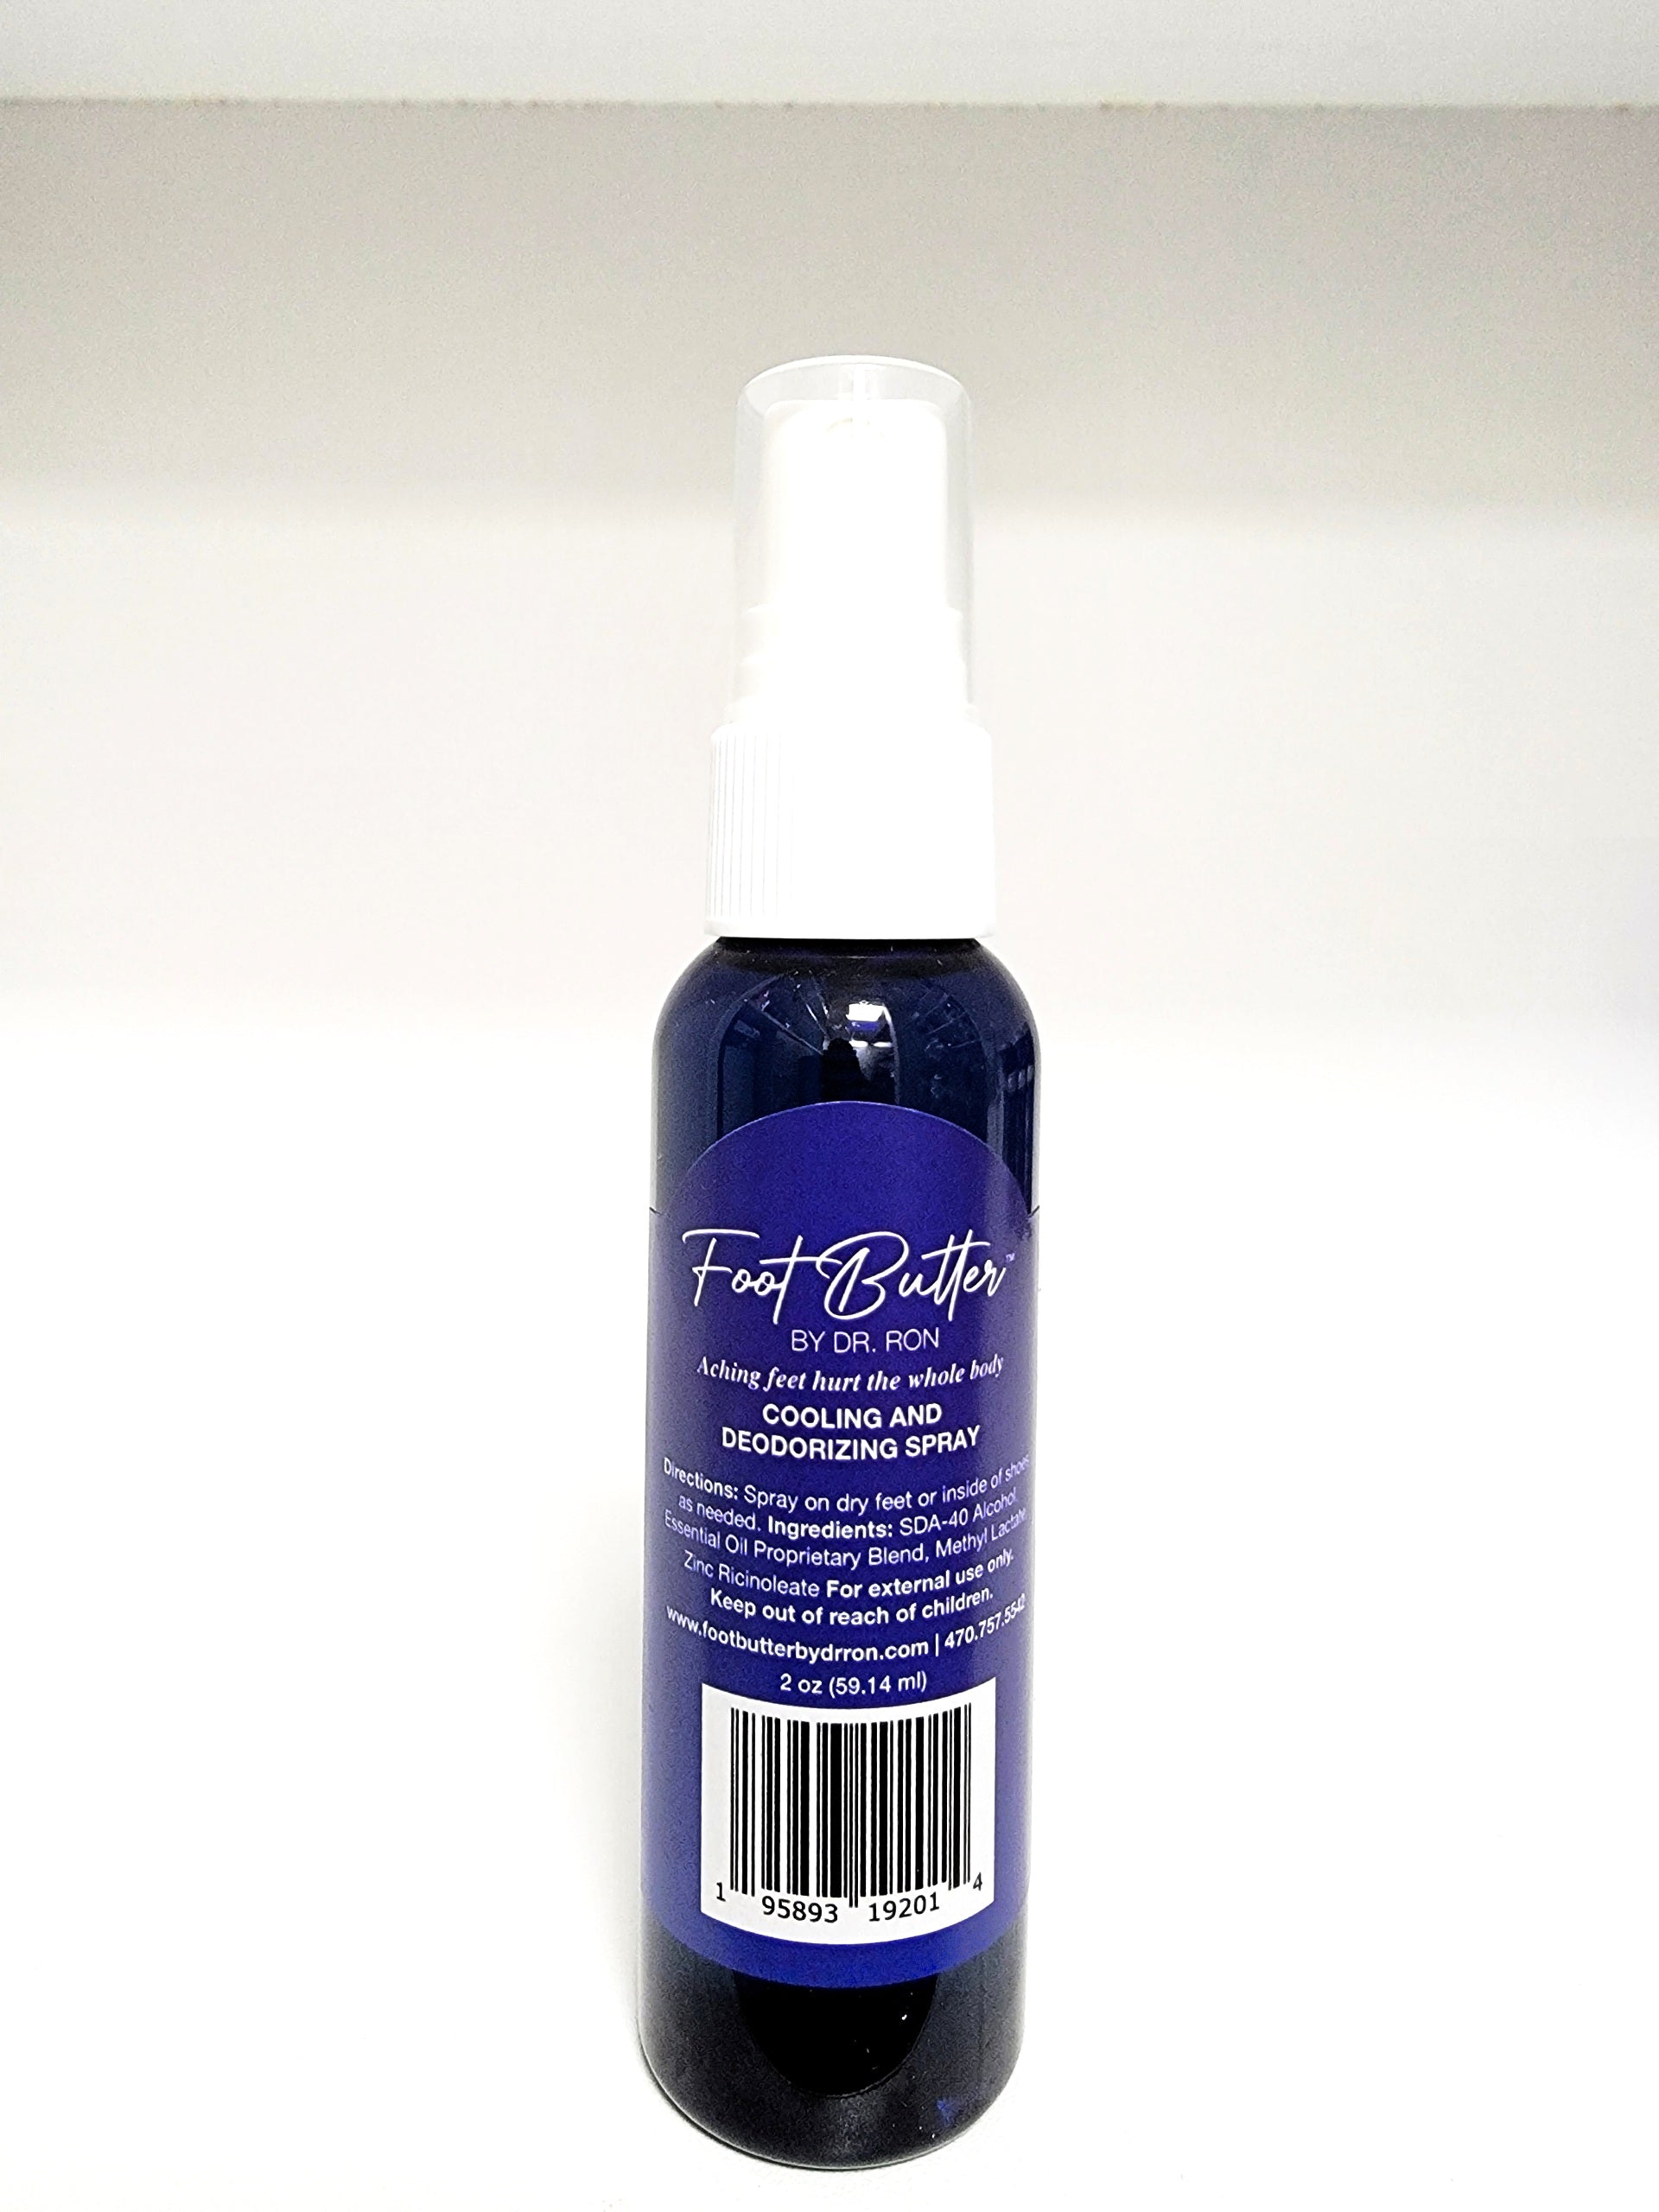 COOLING - Butter Lave Dr & Foot Deodorizing Cooling Ron Spray SPRAY by